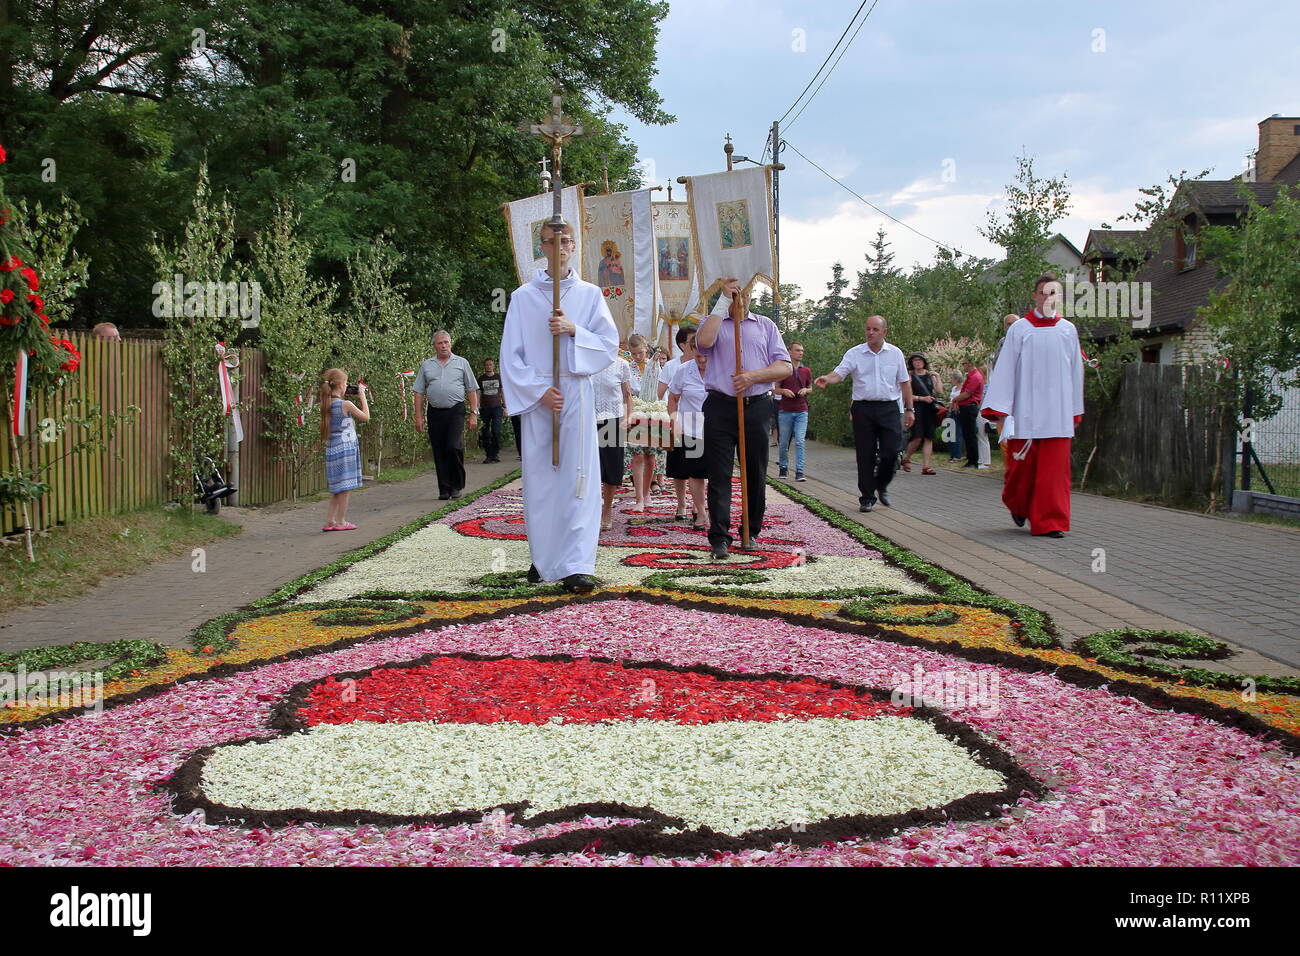 Priests and people during annual procession to celebrate Corpus Christi holiday, walk with cross and religious emblems on floral carpets in Spycimierz Stock Photo